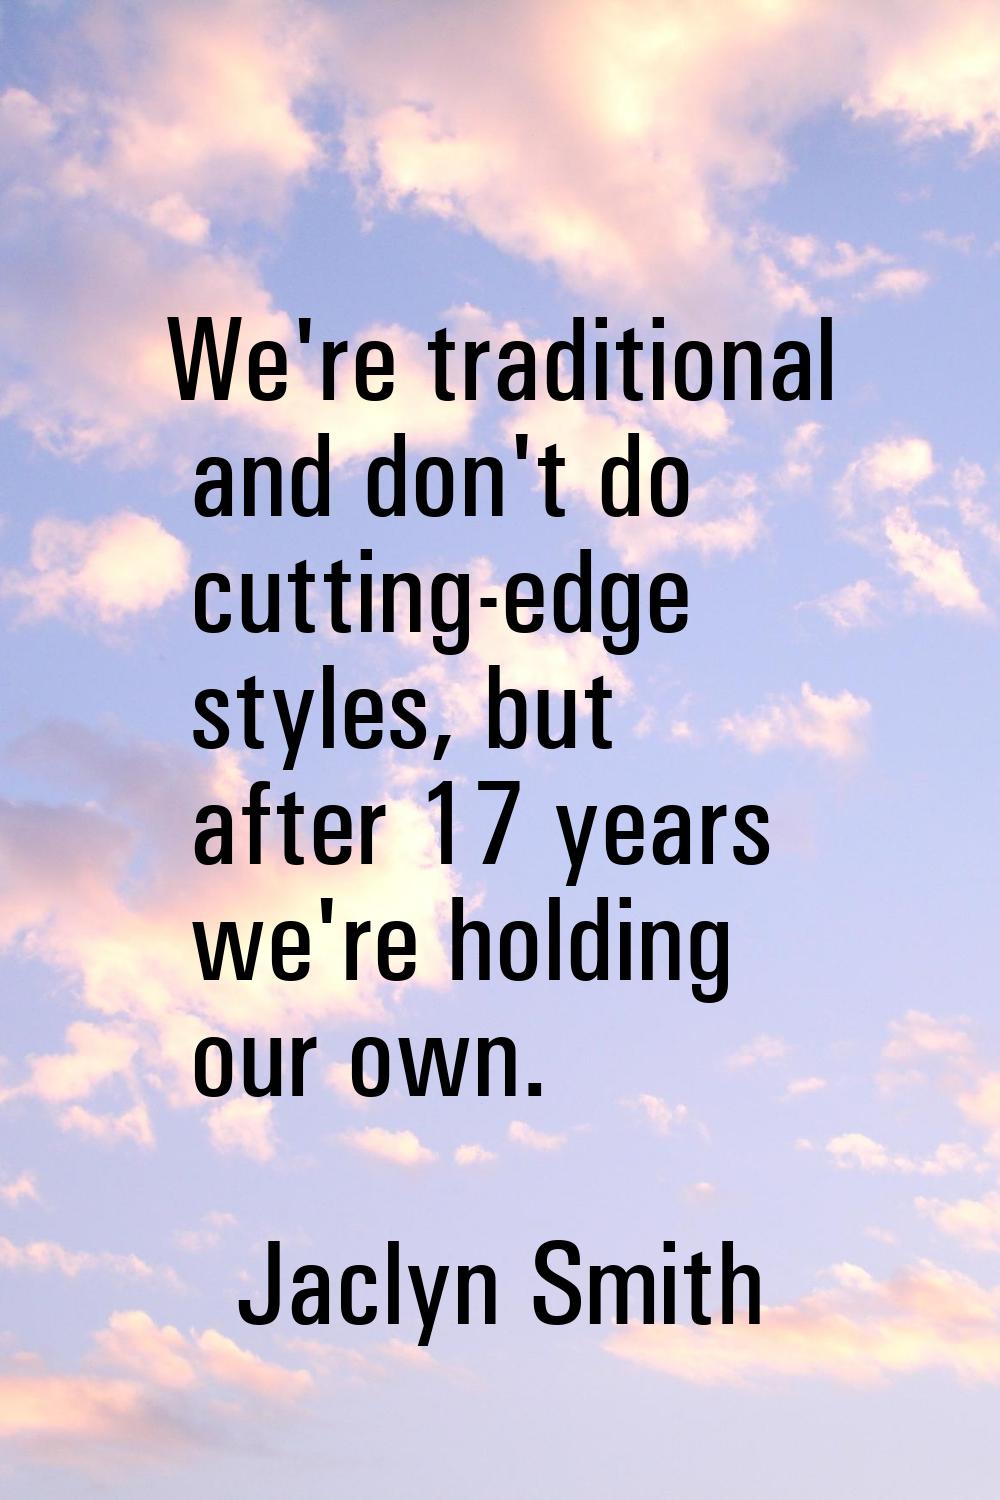 We're traditional and don't do cutting-edge styles, but after 17 years we're holding our own.